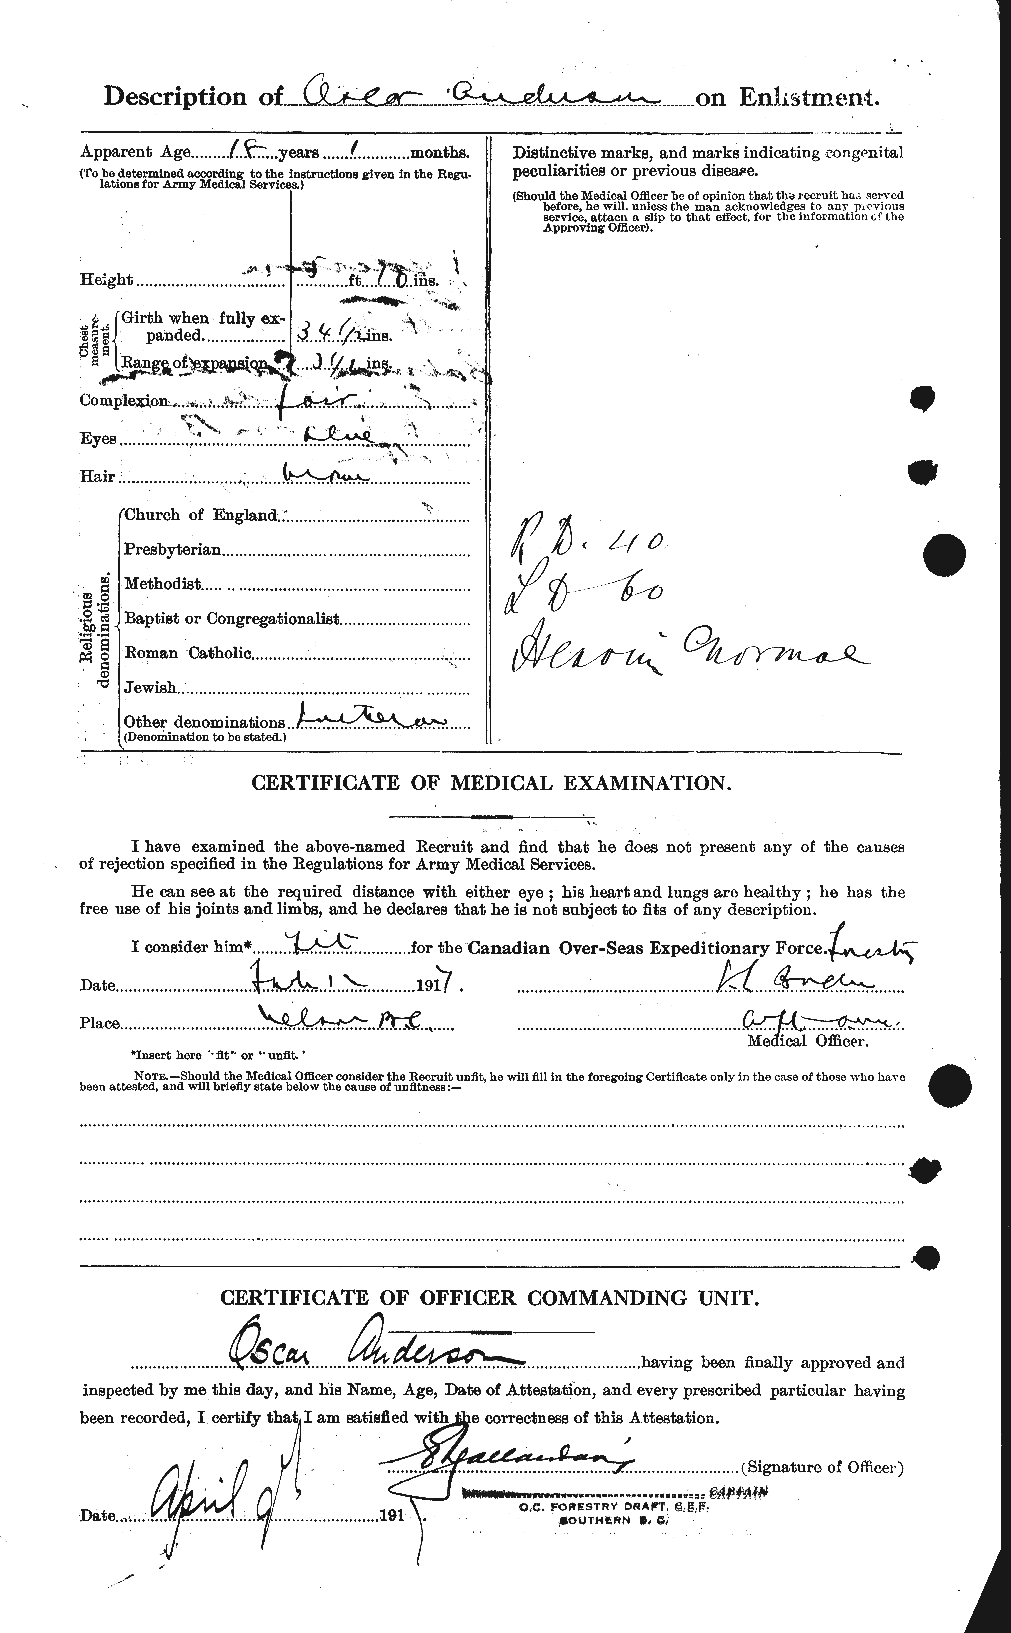 Personnel Records of the First World War - CEF 207389b